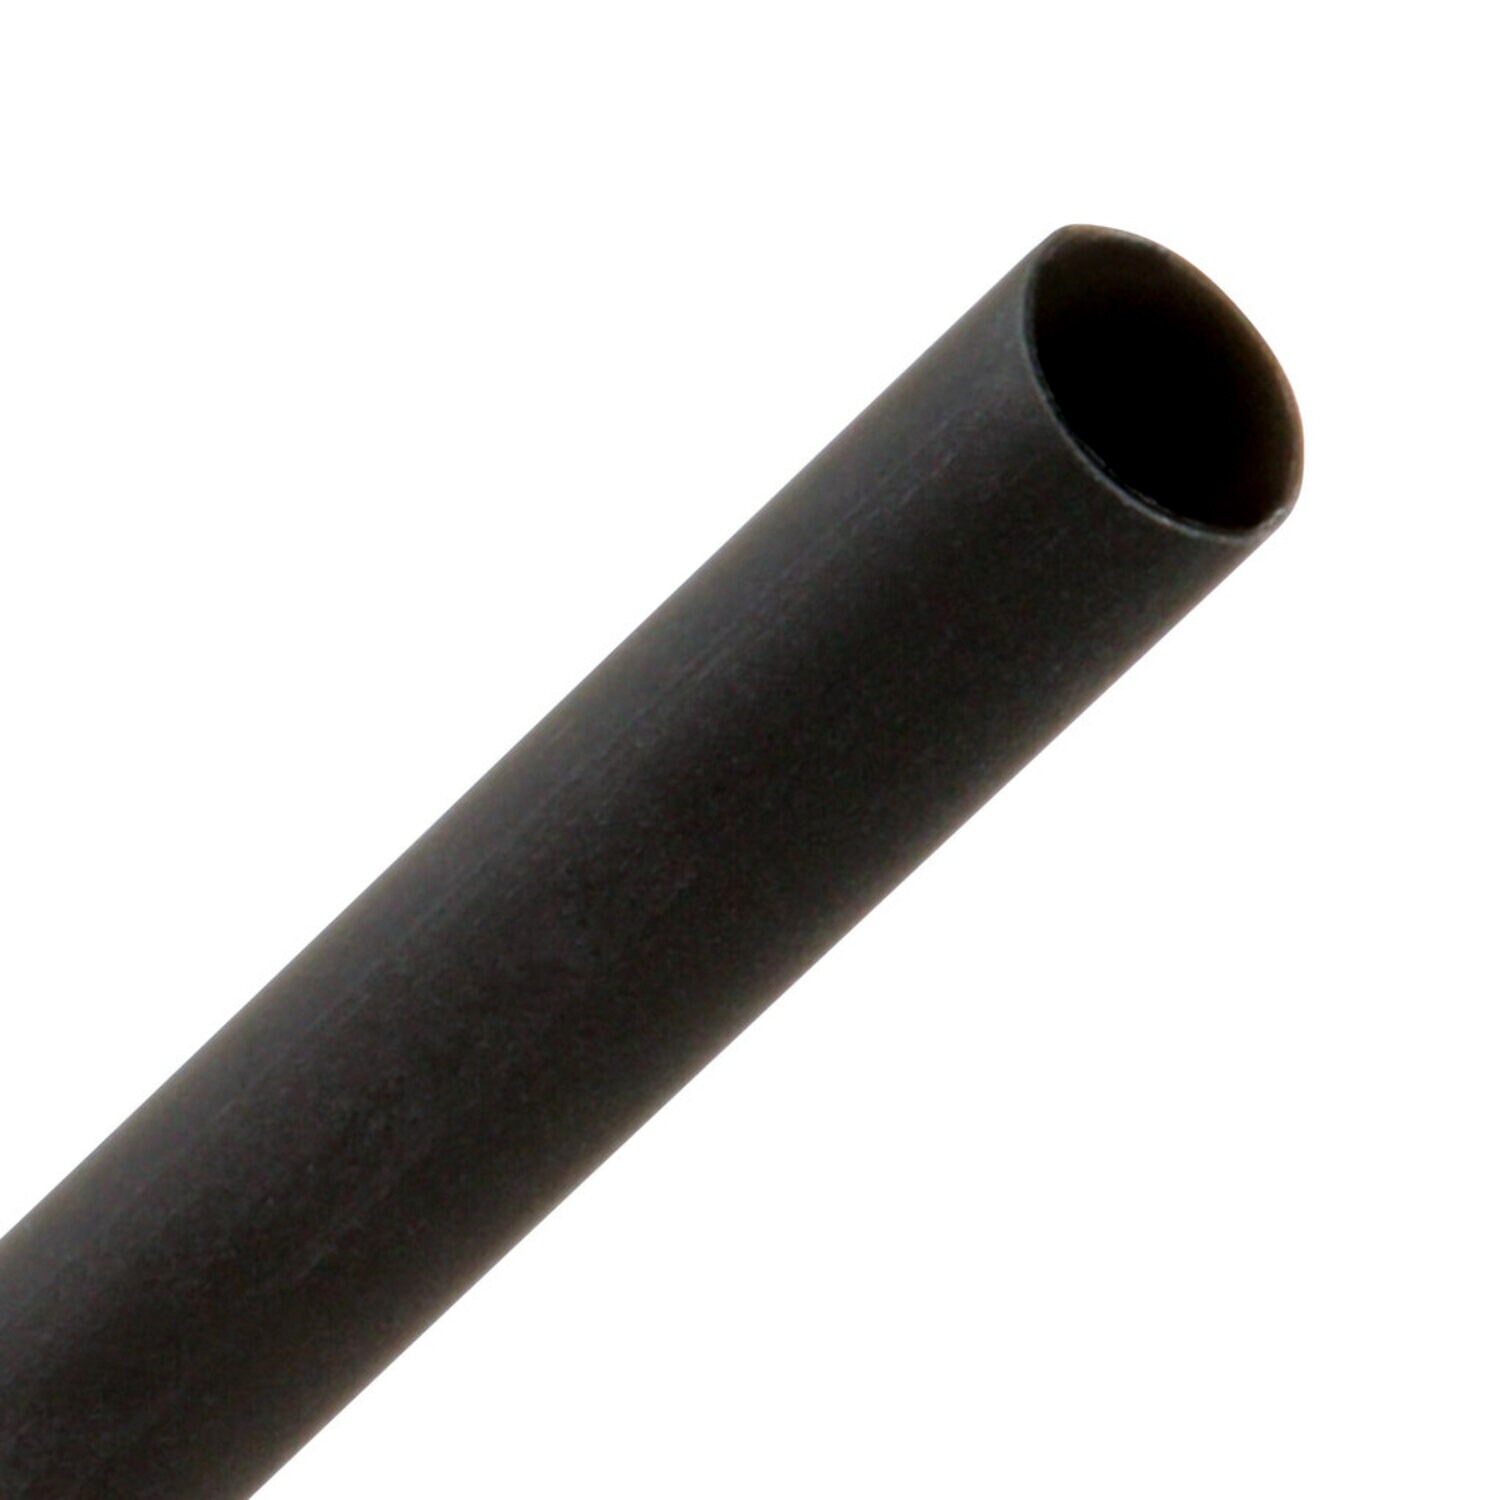 7000133581 - 3M Thin-Wall Heat Shrink Tubing EPS-300, Adhesive-Lined,
1/4-48"-Black-12 Pcs, 48 in length sticks, 12 pieces/case